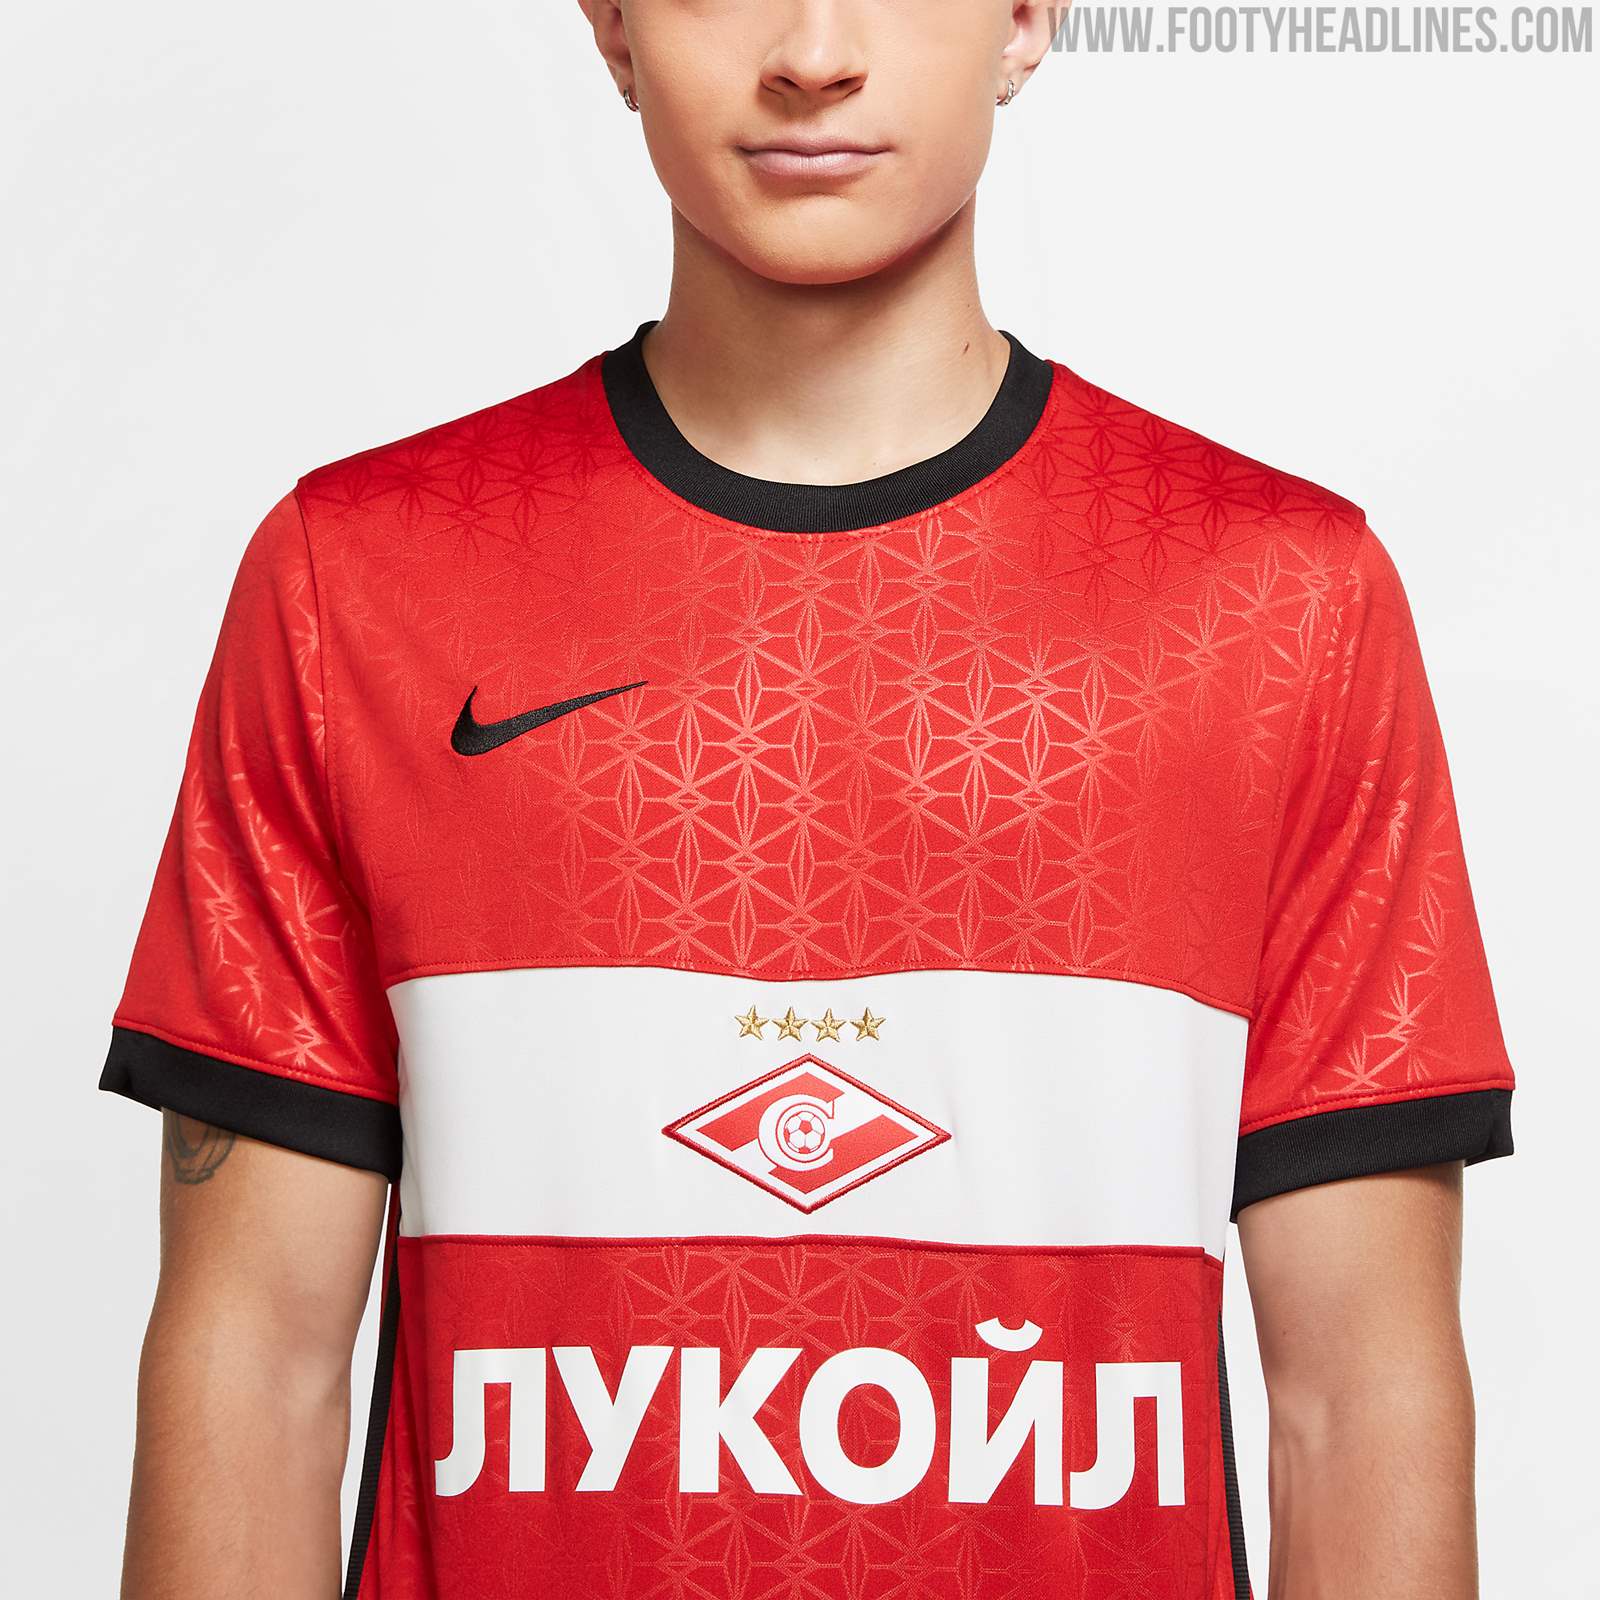 Spartak Moscow Home football shirt 2019 - 2020. Sponsored by Lukoil